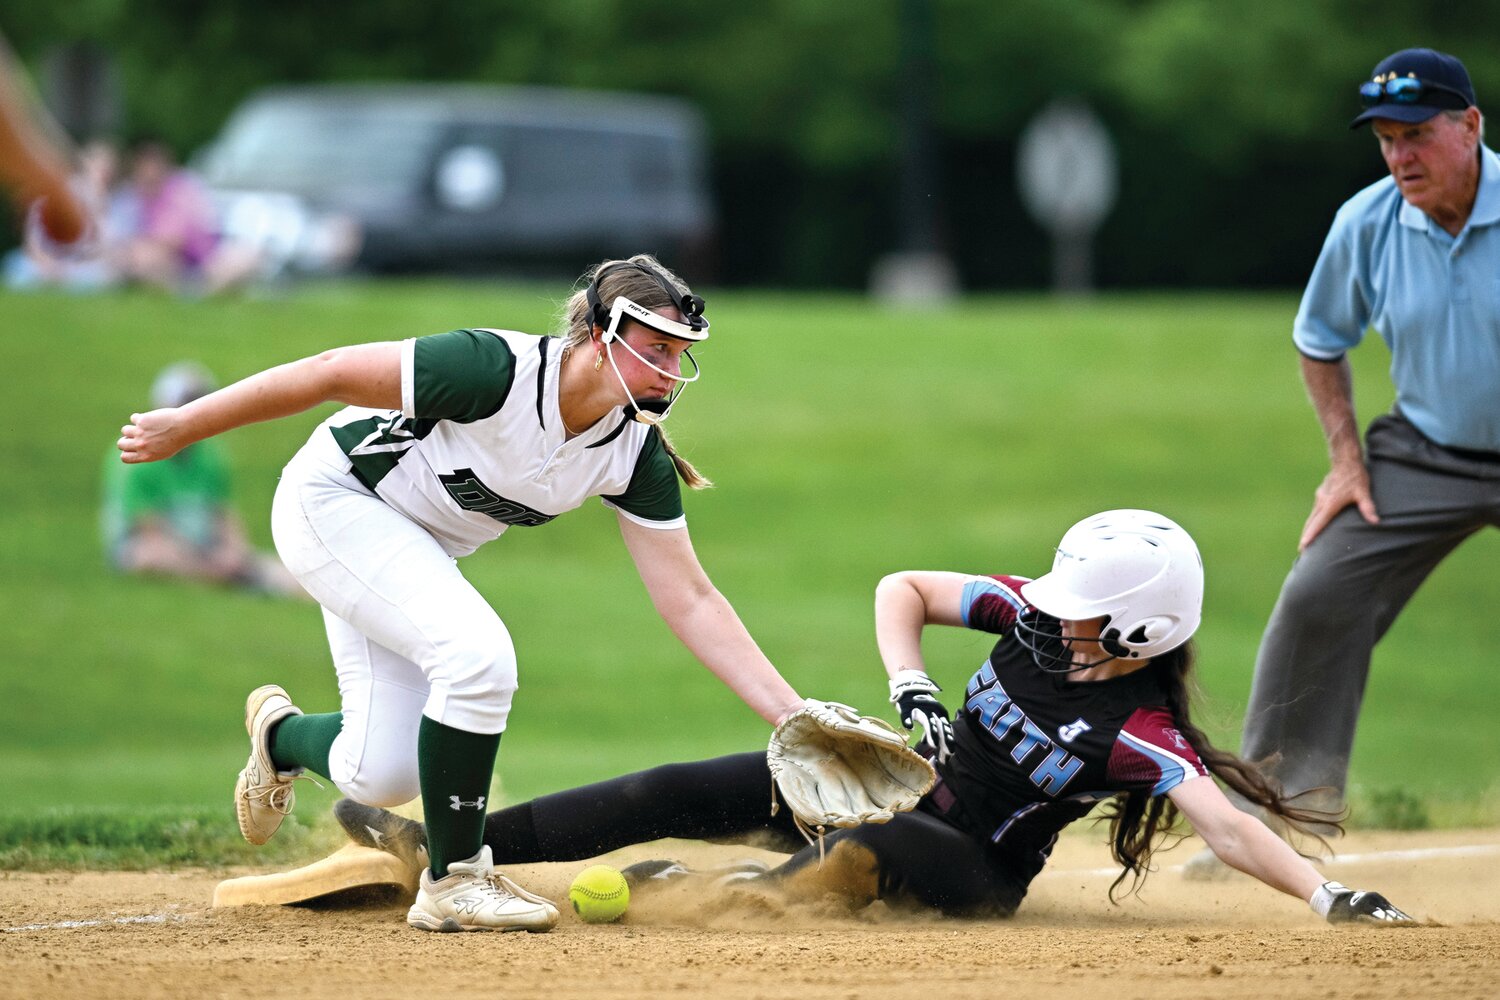 Faith Christian’s Sammy Synder slides into third base, beating the throw to Dock Mennonite’s Laura Charles during the fifth inning.